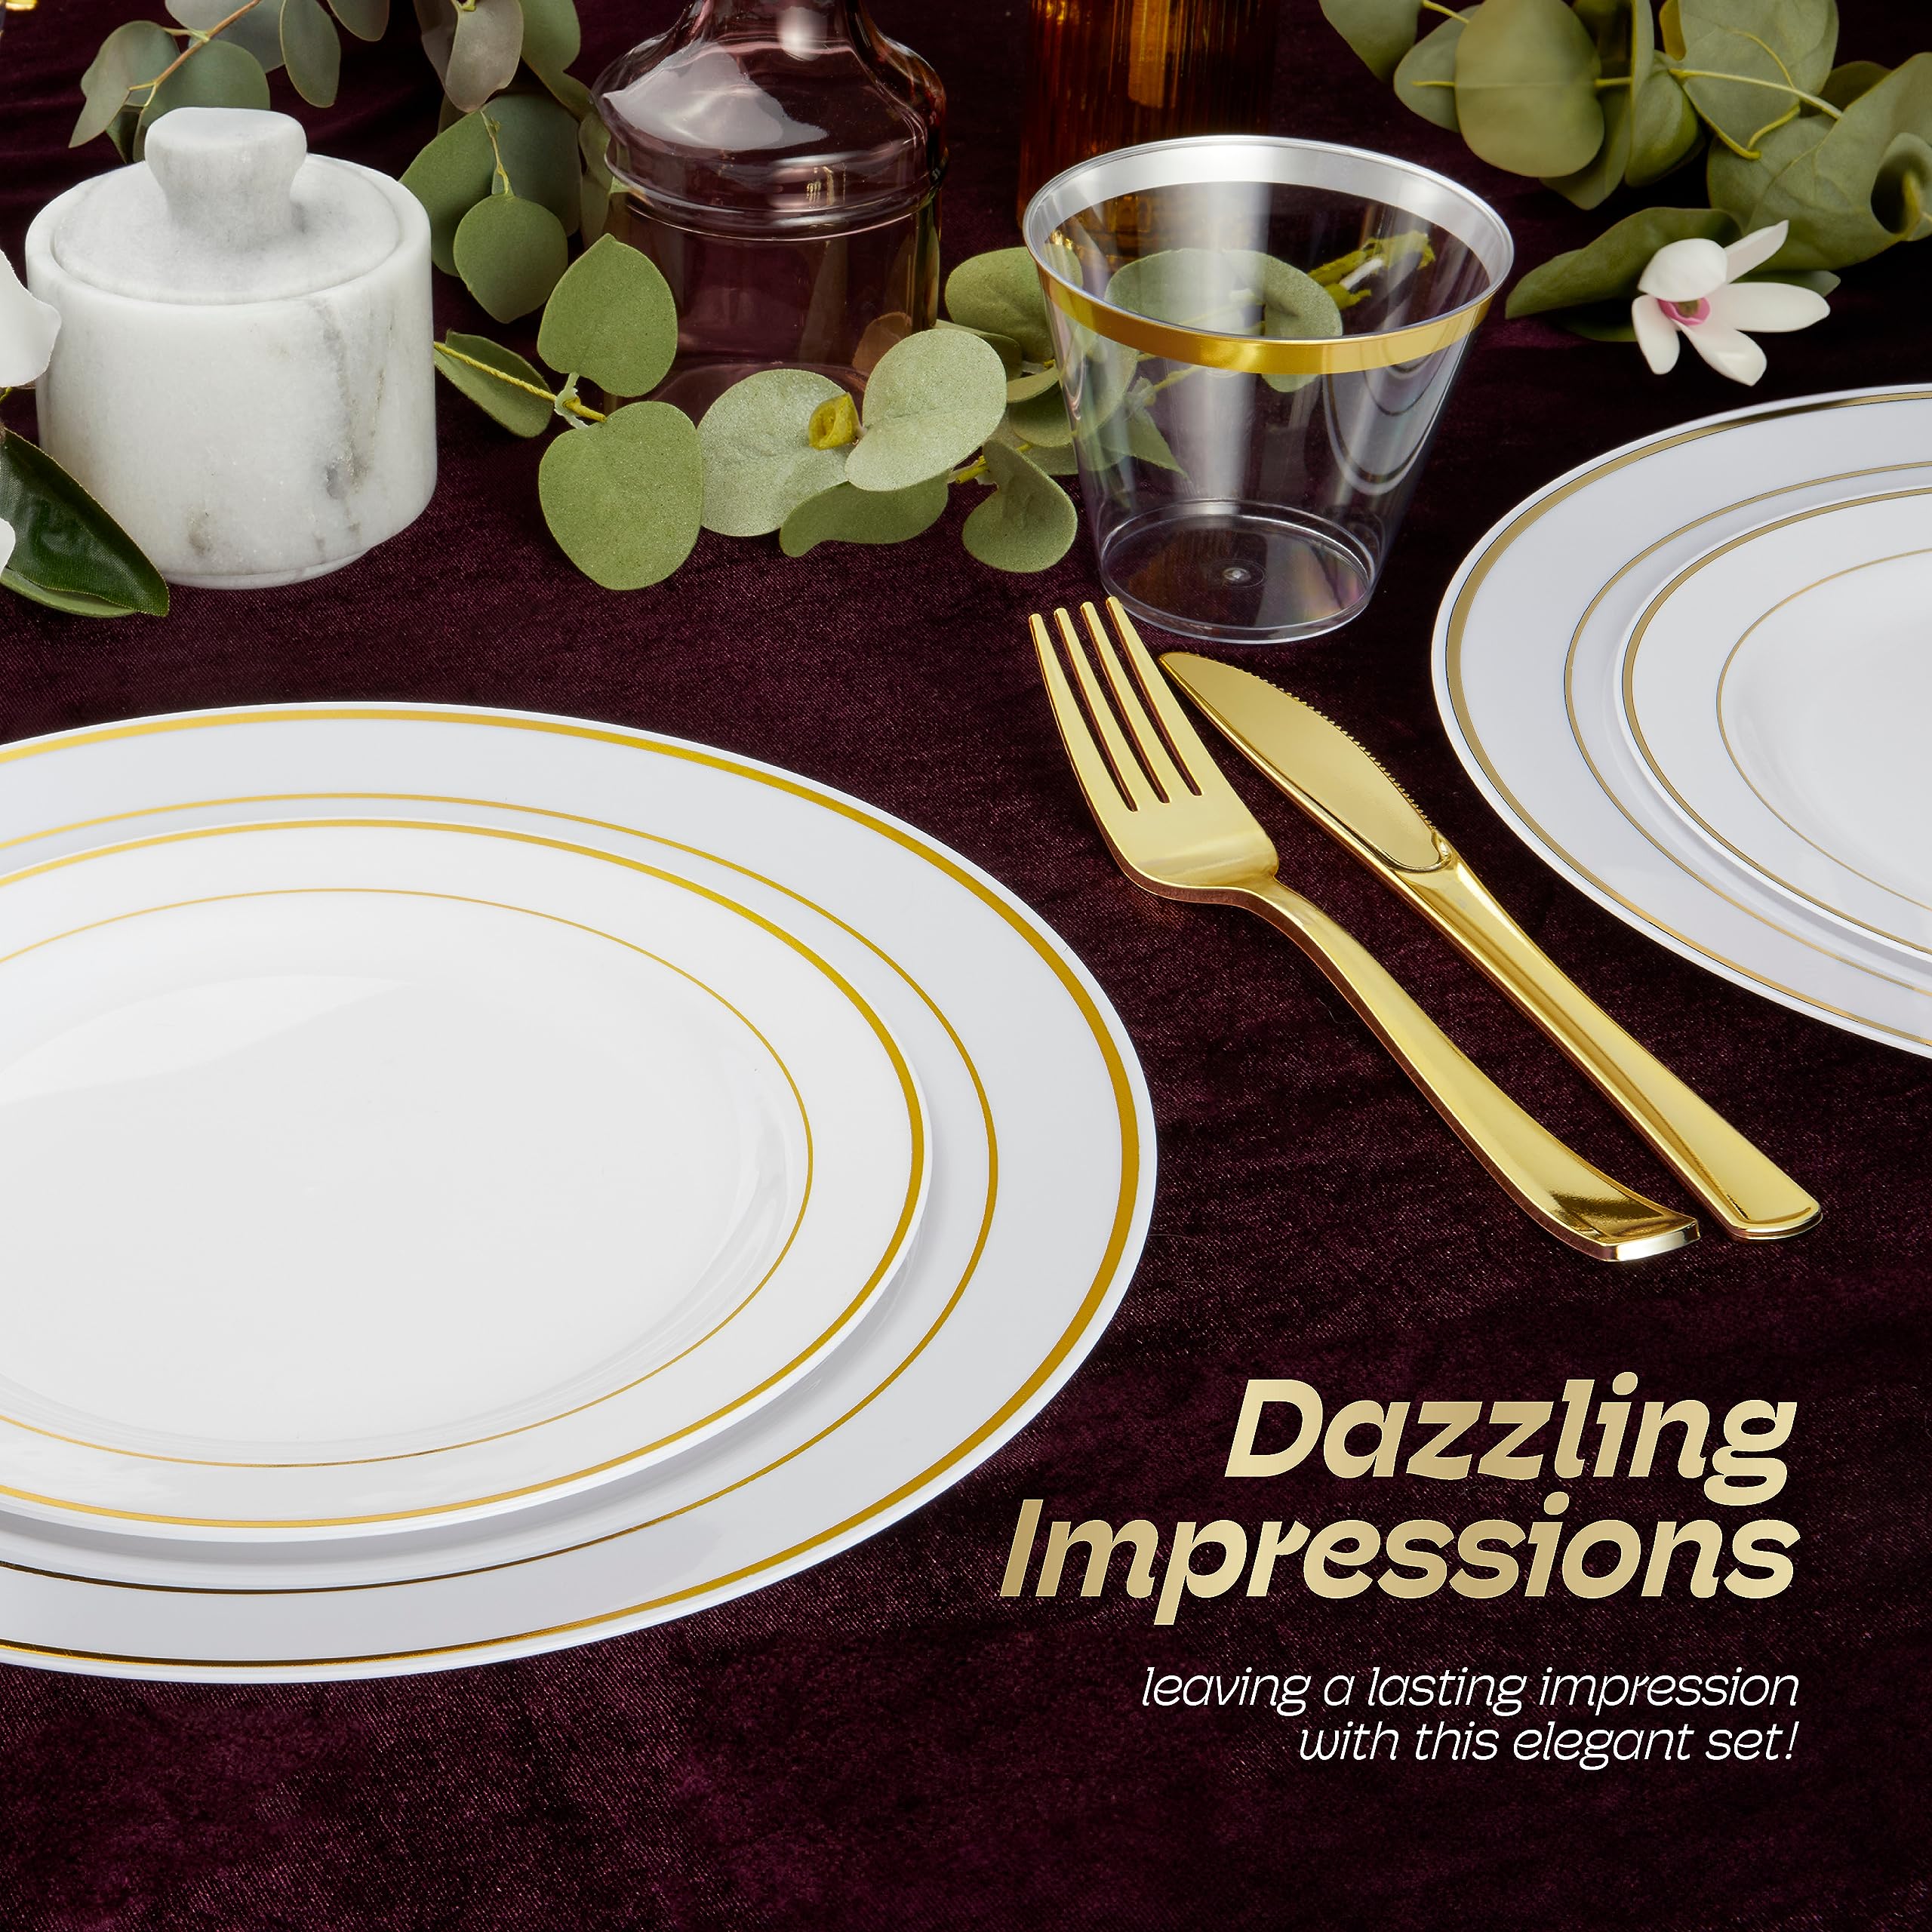 600pcs Plastic Dinnerware Set 100 Guest, Gold Plastic plates for party, Gold Party Plates Sets For 100 Guests, Premium Wedding Plates Disposable Set 100 Guests Includes Plates, Cups, And Cutlery.